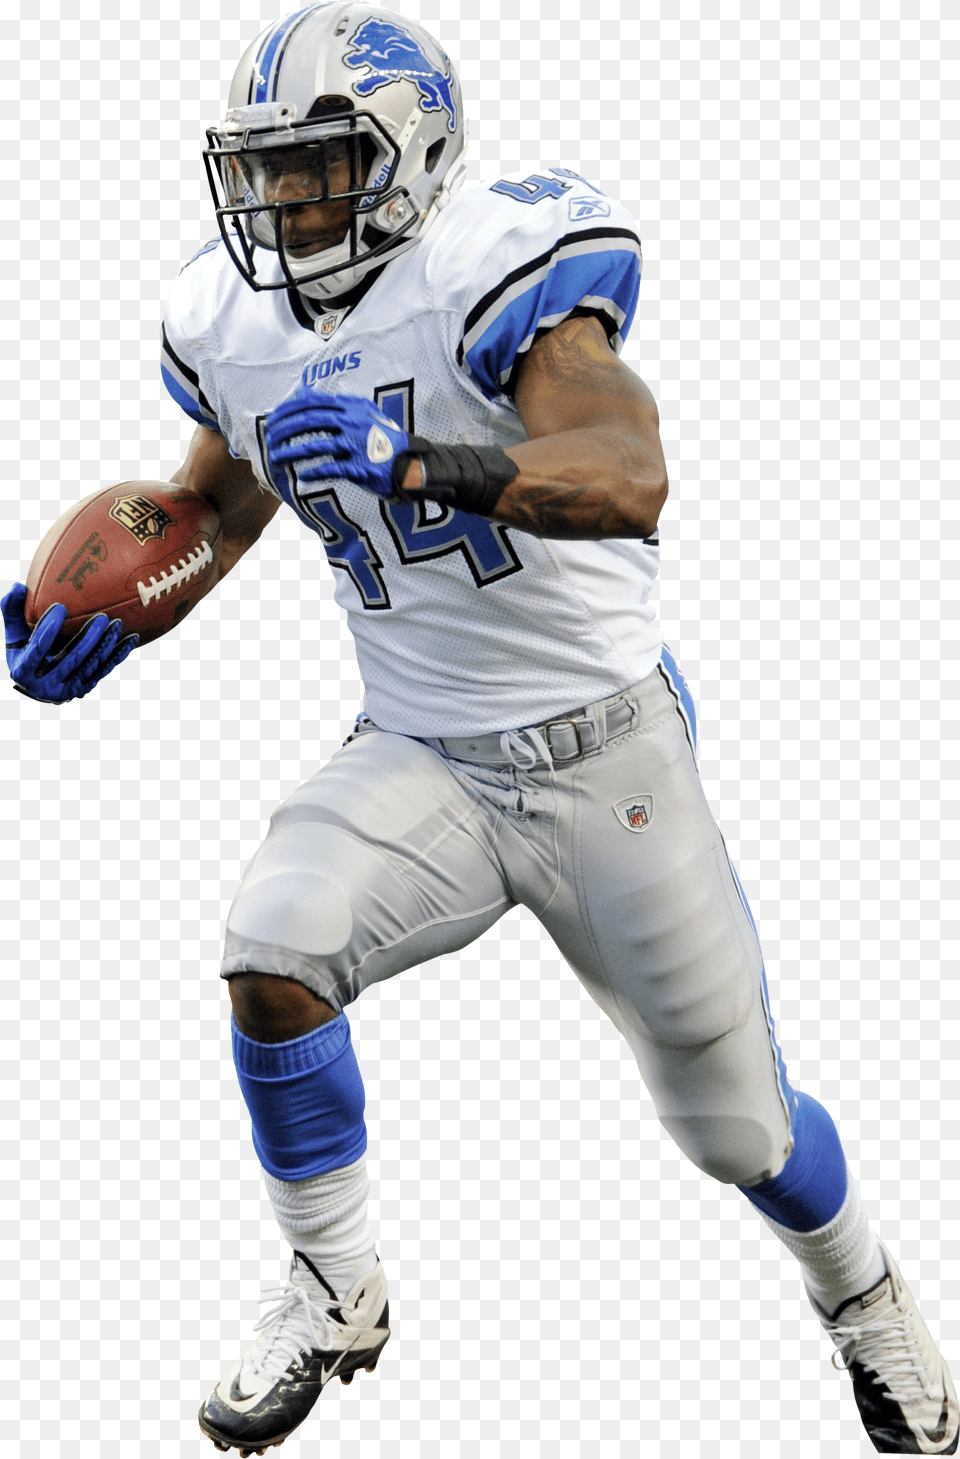 Football 12 Nfl Bowl Madden Detroit American Clipart Detroit Lions Players, Sport, Playing American Football, Person, Helmet Free Transparent Png